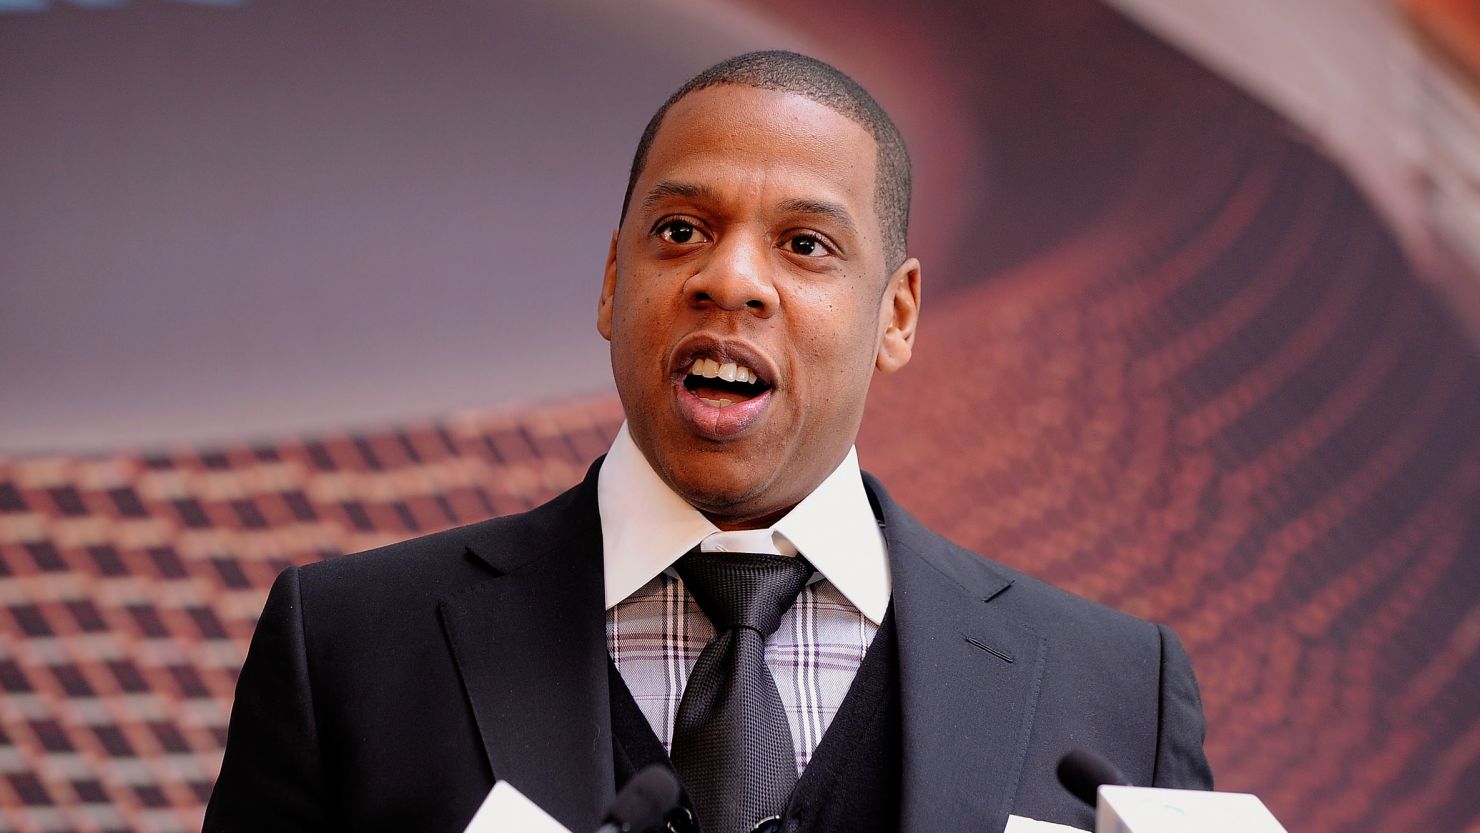 Rapper Jay-Z, a part owner of the Nets, speaks during the March groundbreaking at Barclays Center in New York.